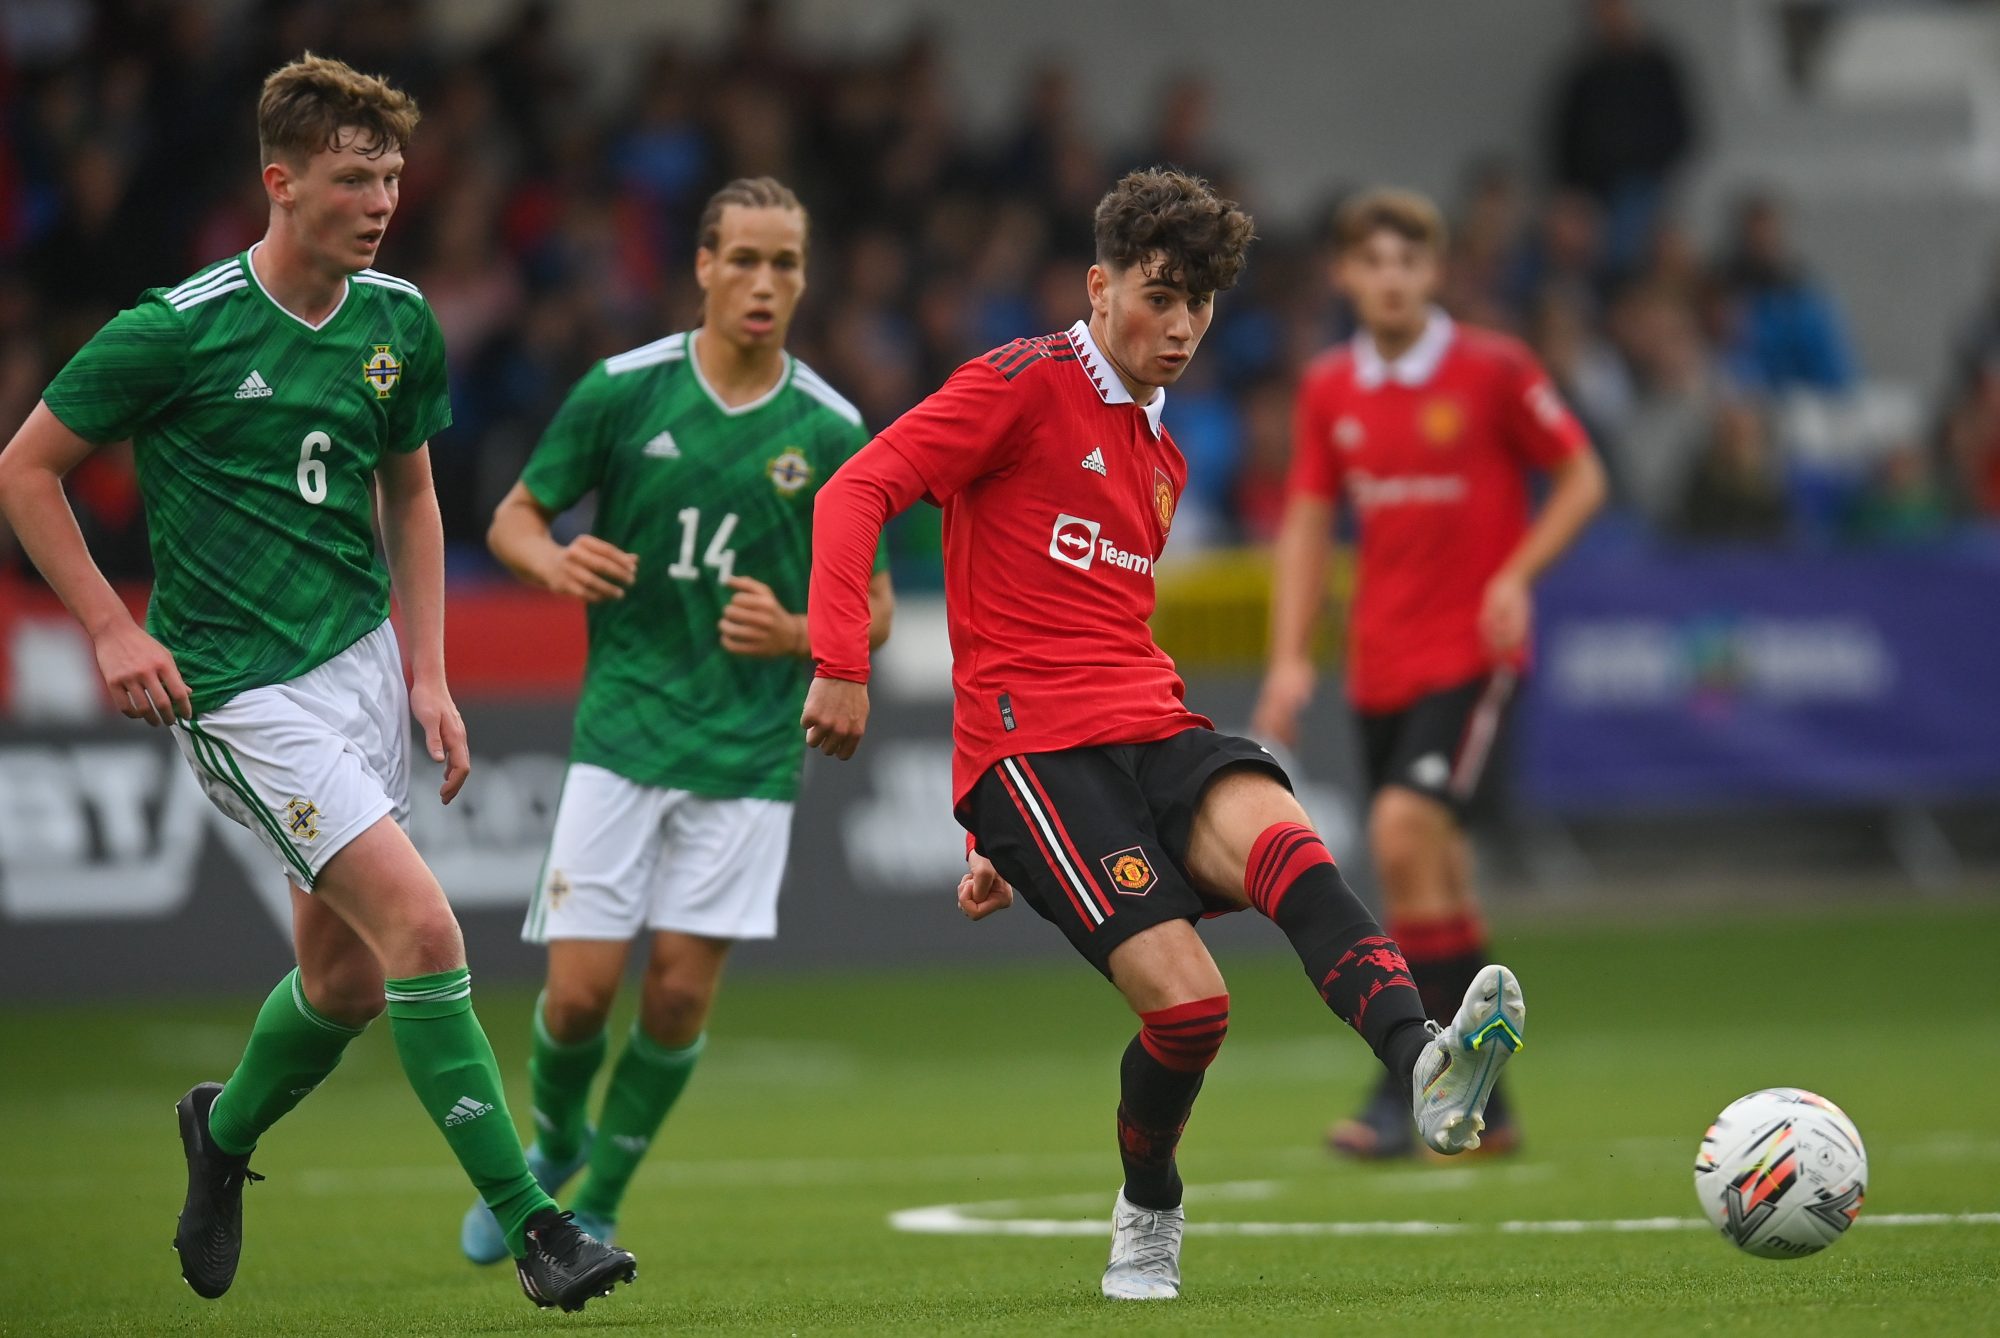 Ruben Curley of Manchester United during the SuperCupNI match between Northern Ireland and Manchester United at Coleraine Showgrounds in Coleraine, Derry.